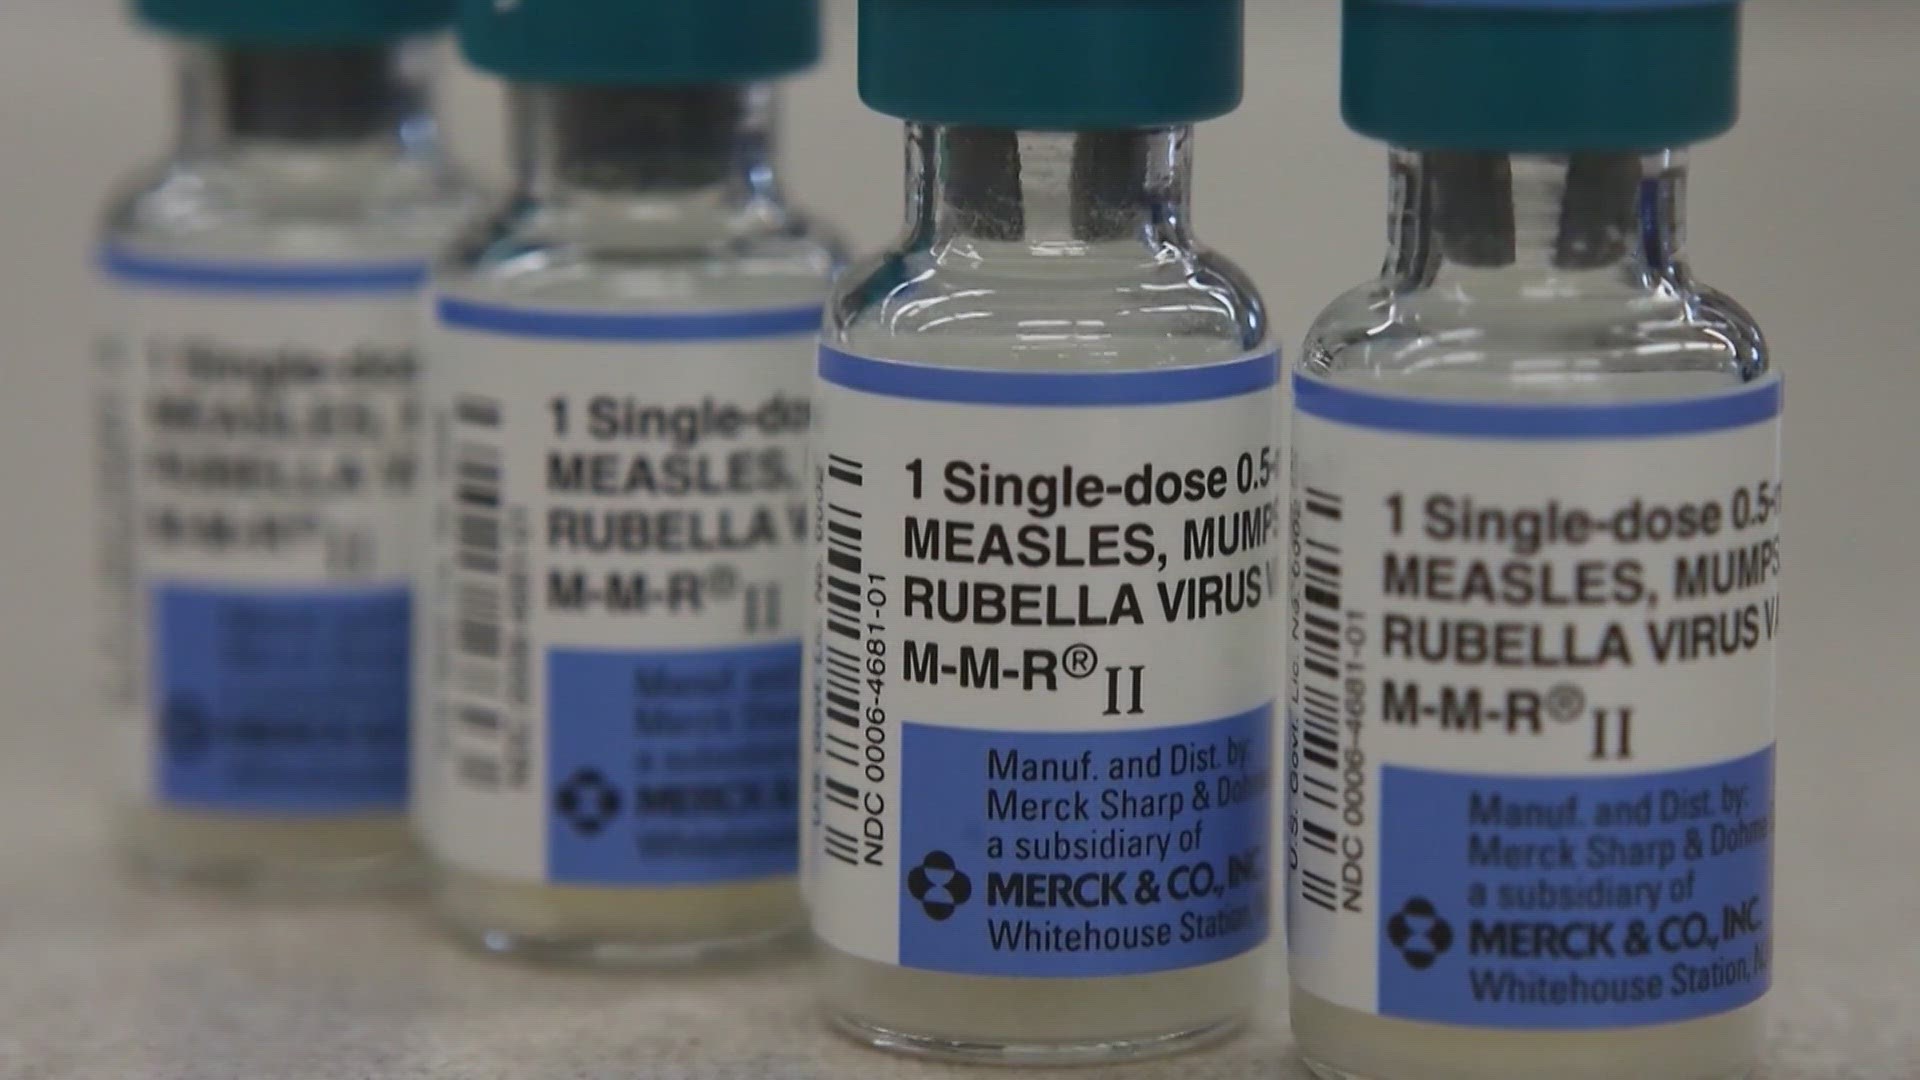 Health officials are encouraging everyone to make sure they have their measles vaccination. Cases are on the rise in the country, including Missouri and Illinois.